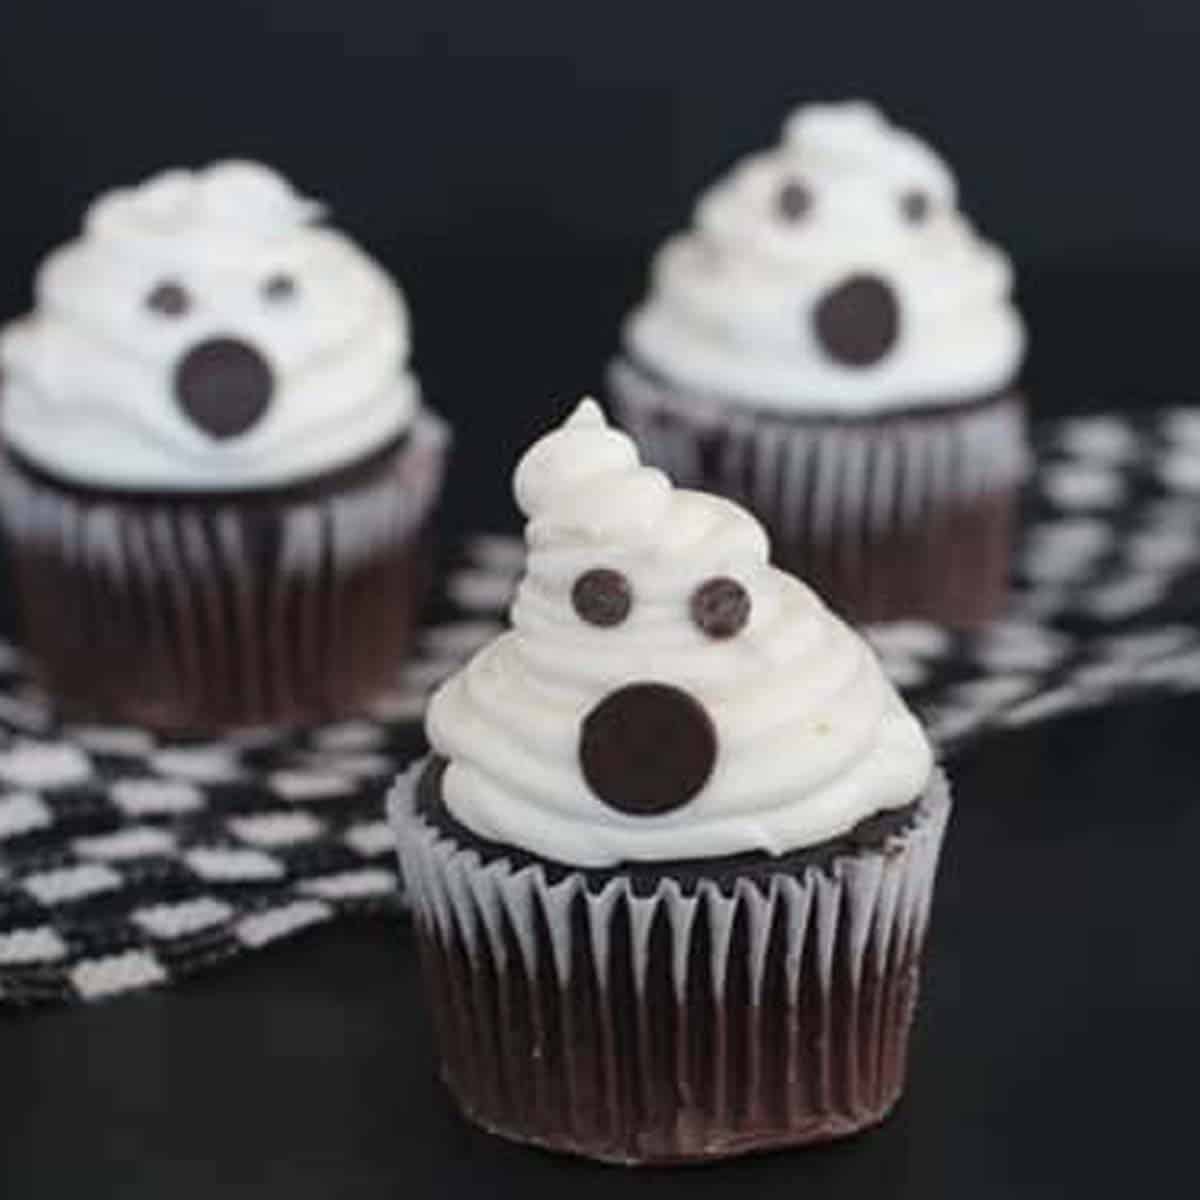 Make these easy Halloween treats for your party